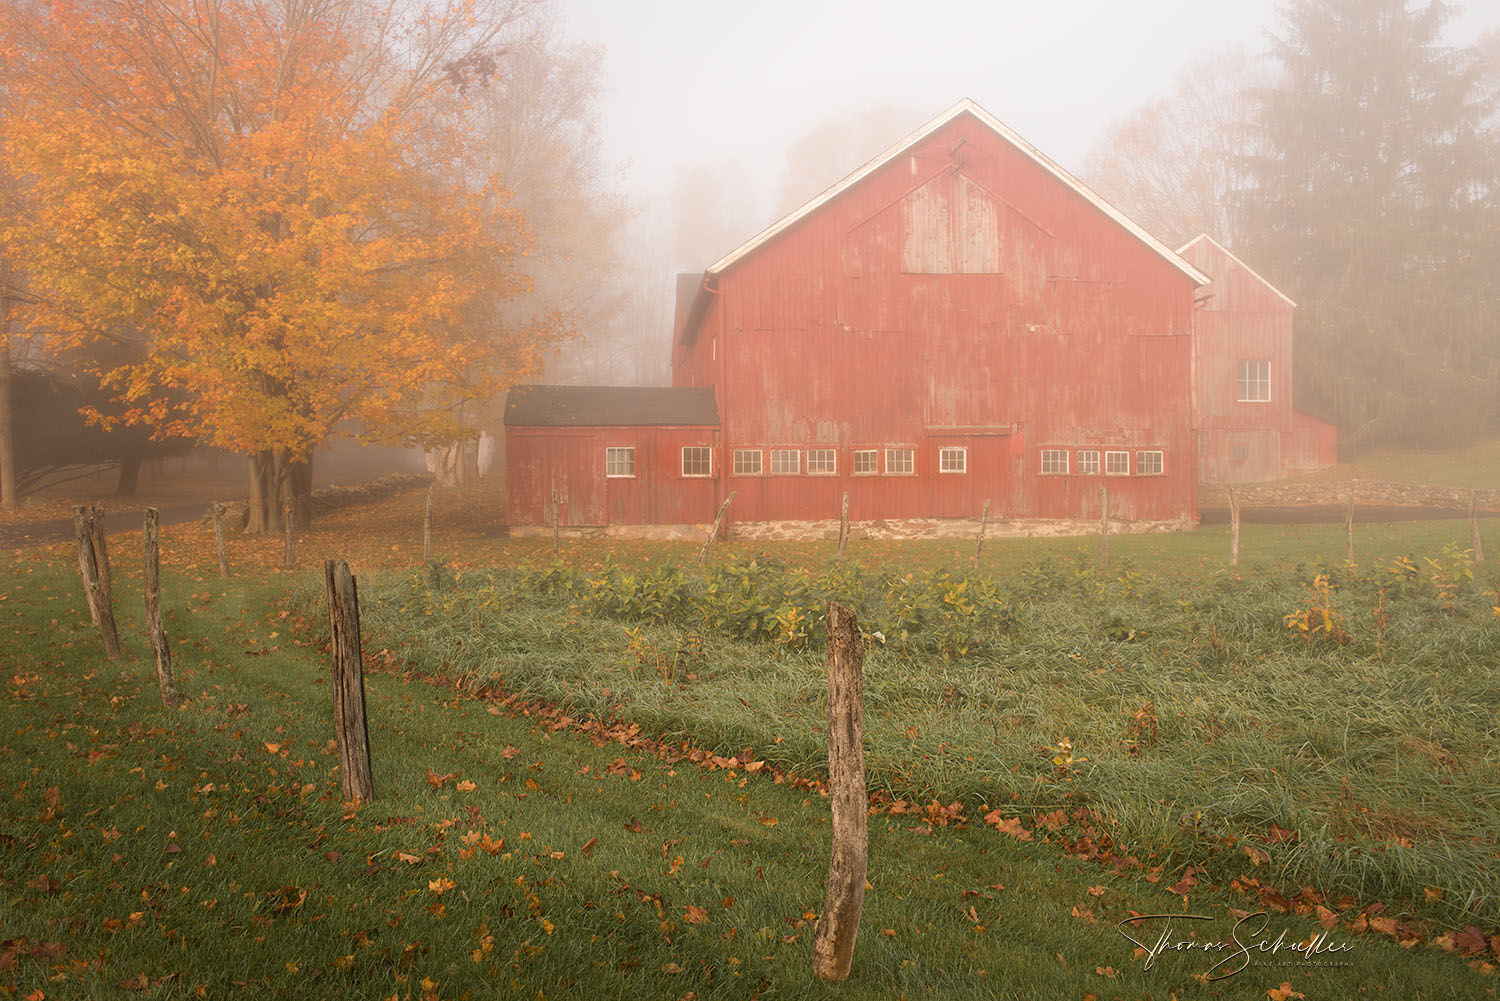 Rural Sherman Connecticut Rustic Red Barn Print | Foggy Morning shrouds this beautiful country setting with character